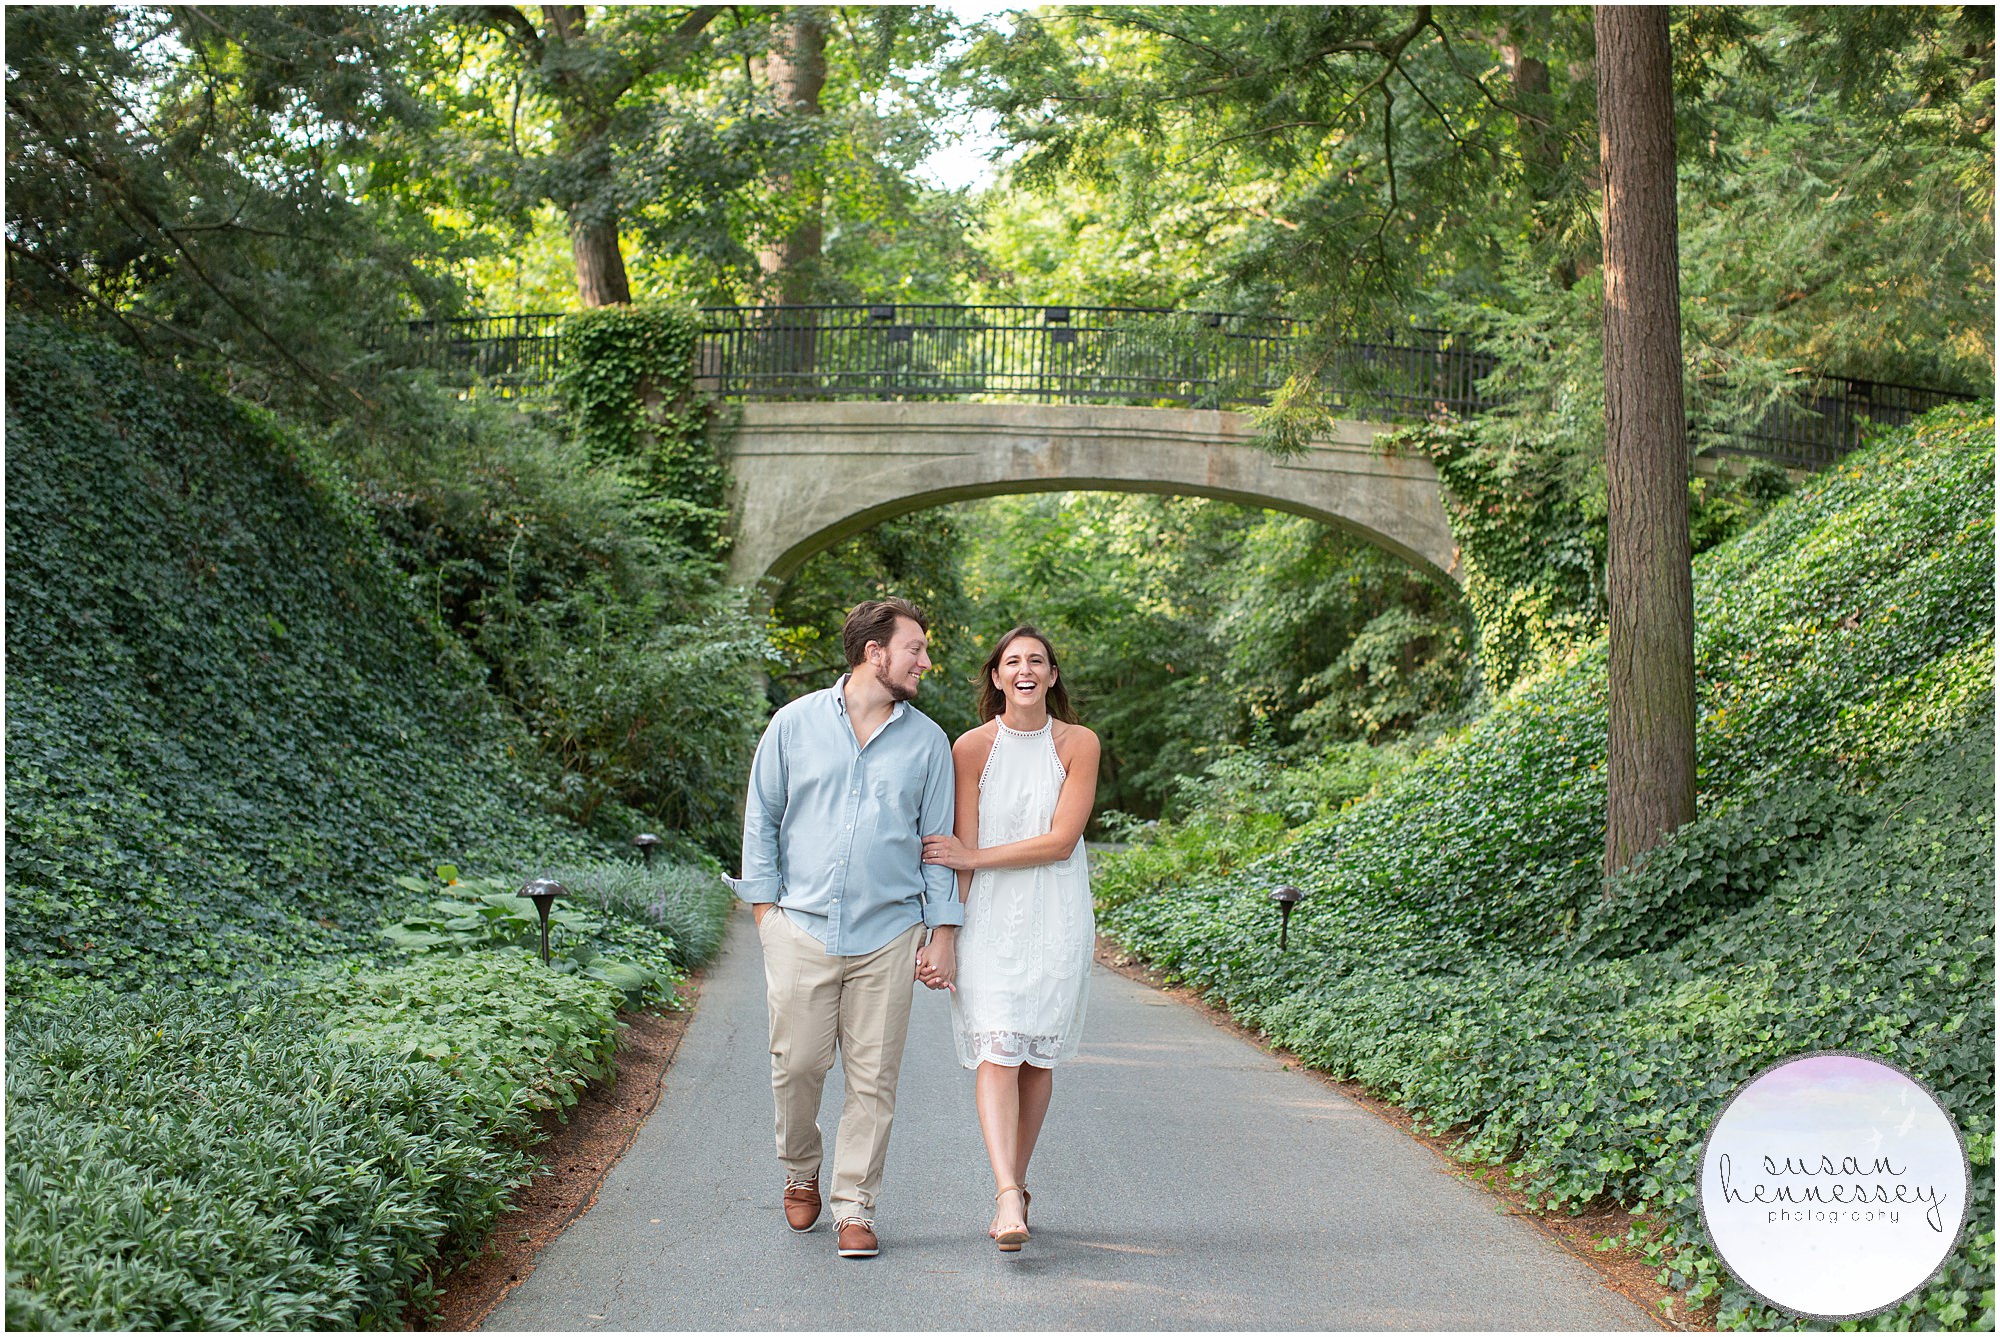 A happy couple at their photo session at Longwood Gardens